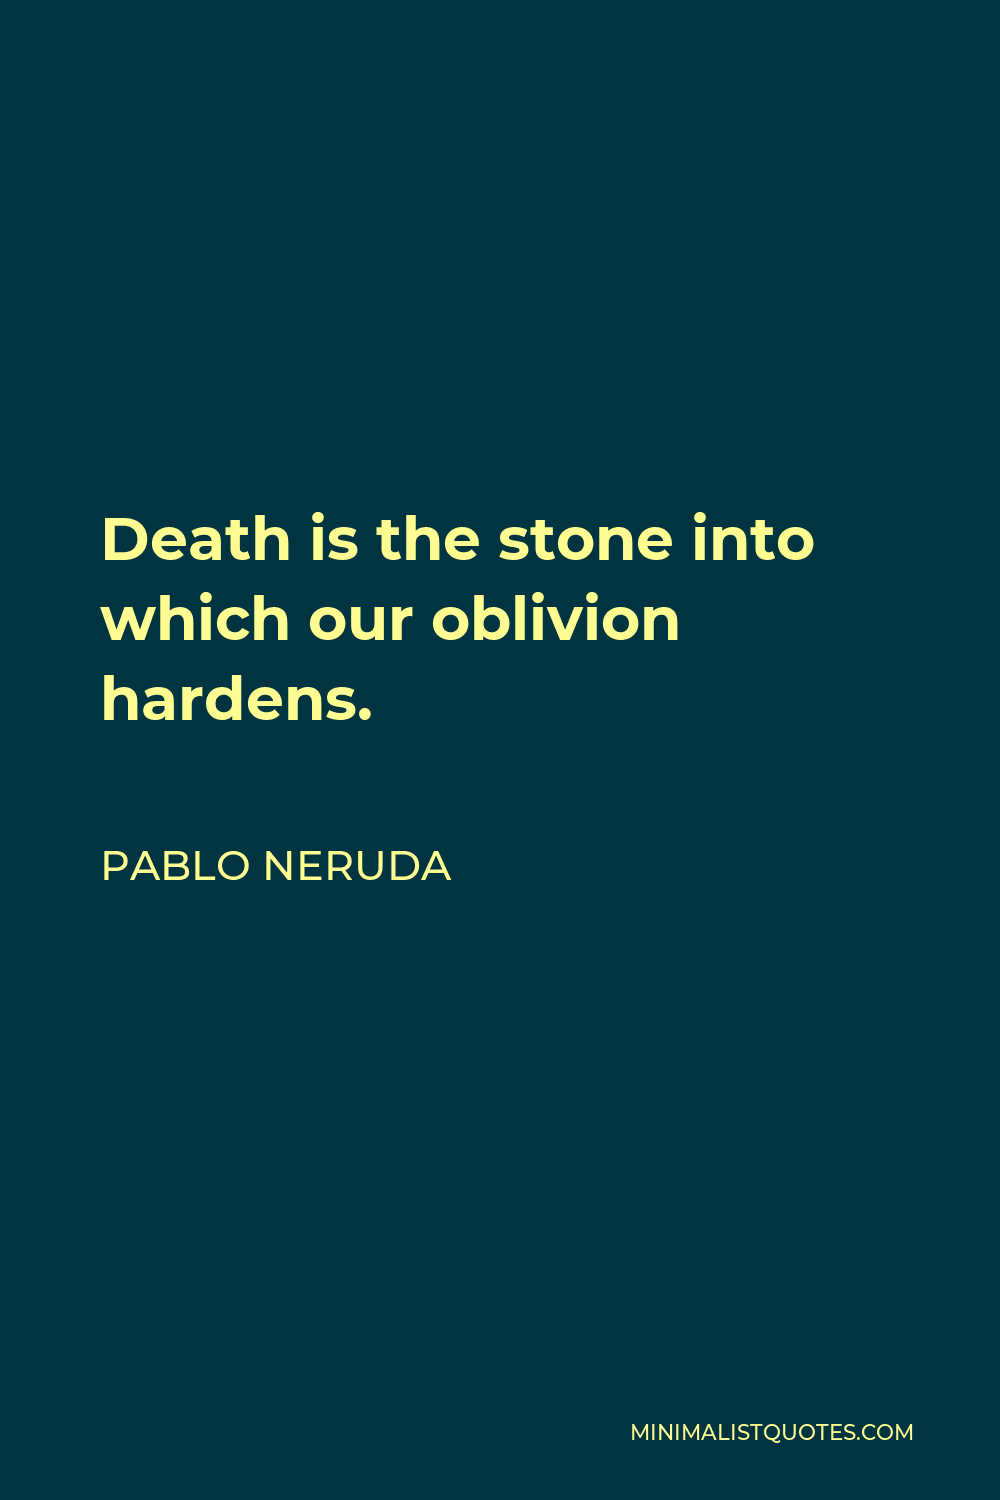 Pablo Neruda Quote - Death is the stone into which our oblivion hardens.